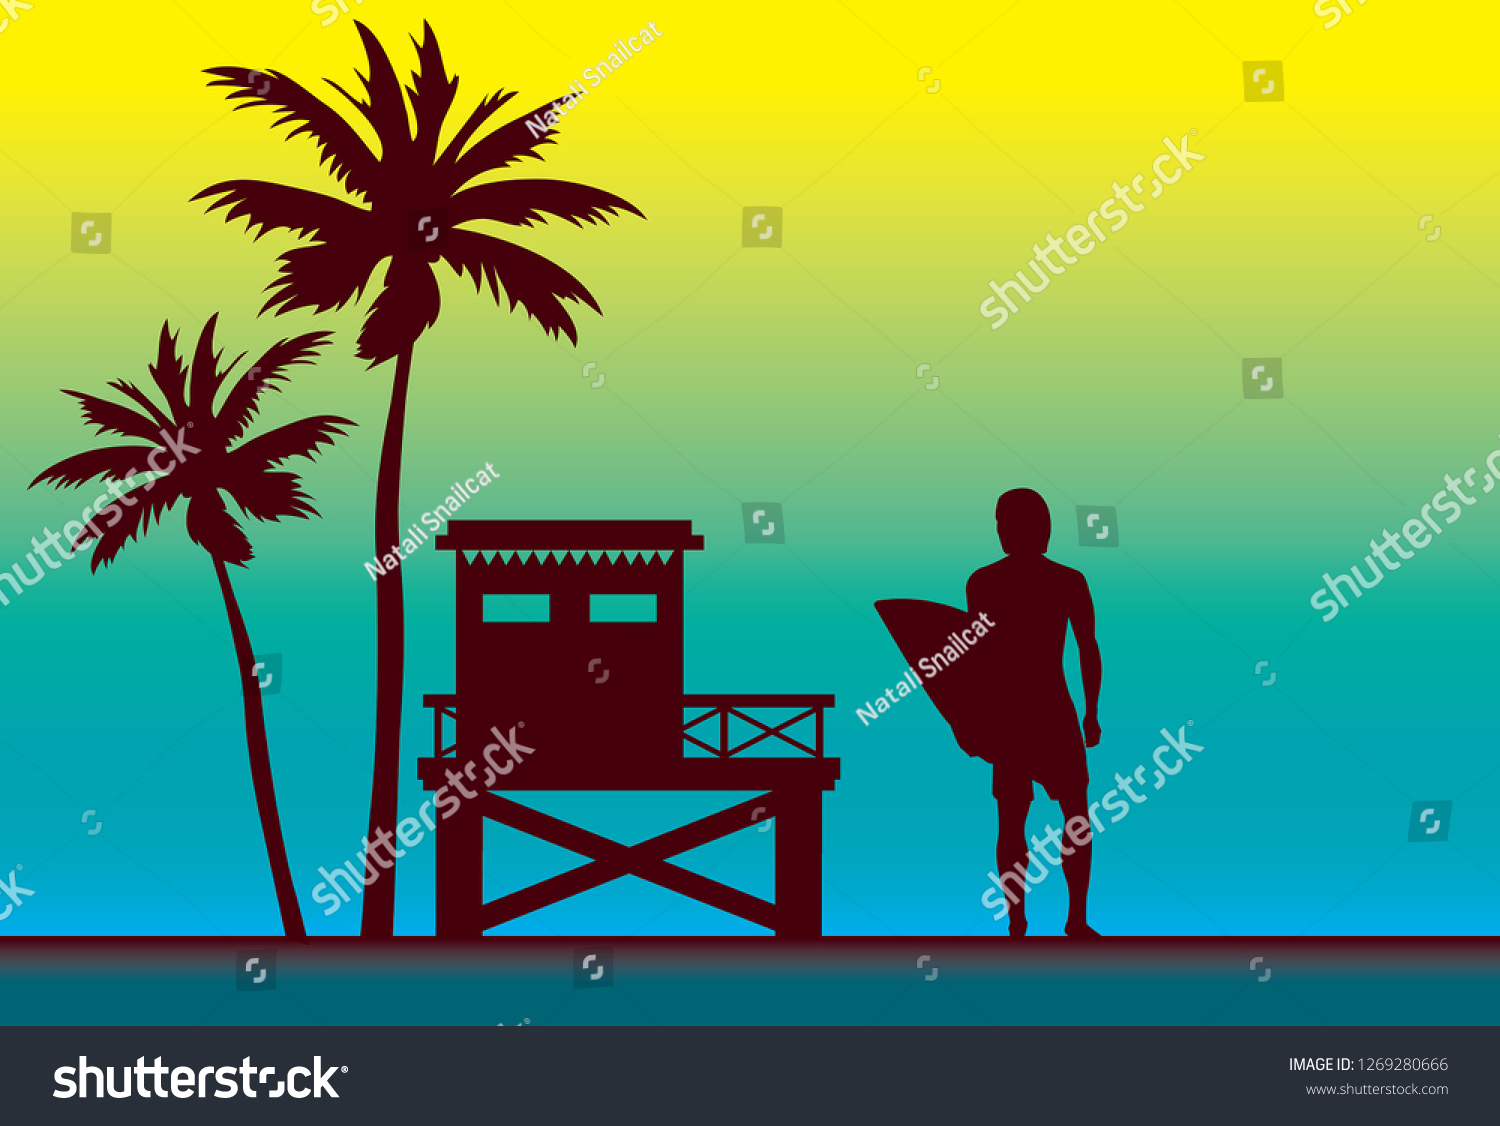 SVG of Summer nature vector illustration - Silhouette of surfer, lifeguard station and palm tree. Sport card - surfing. svg